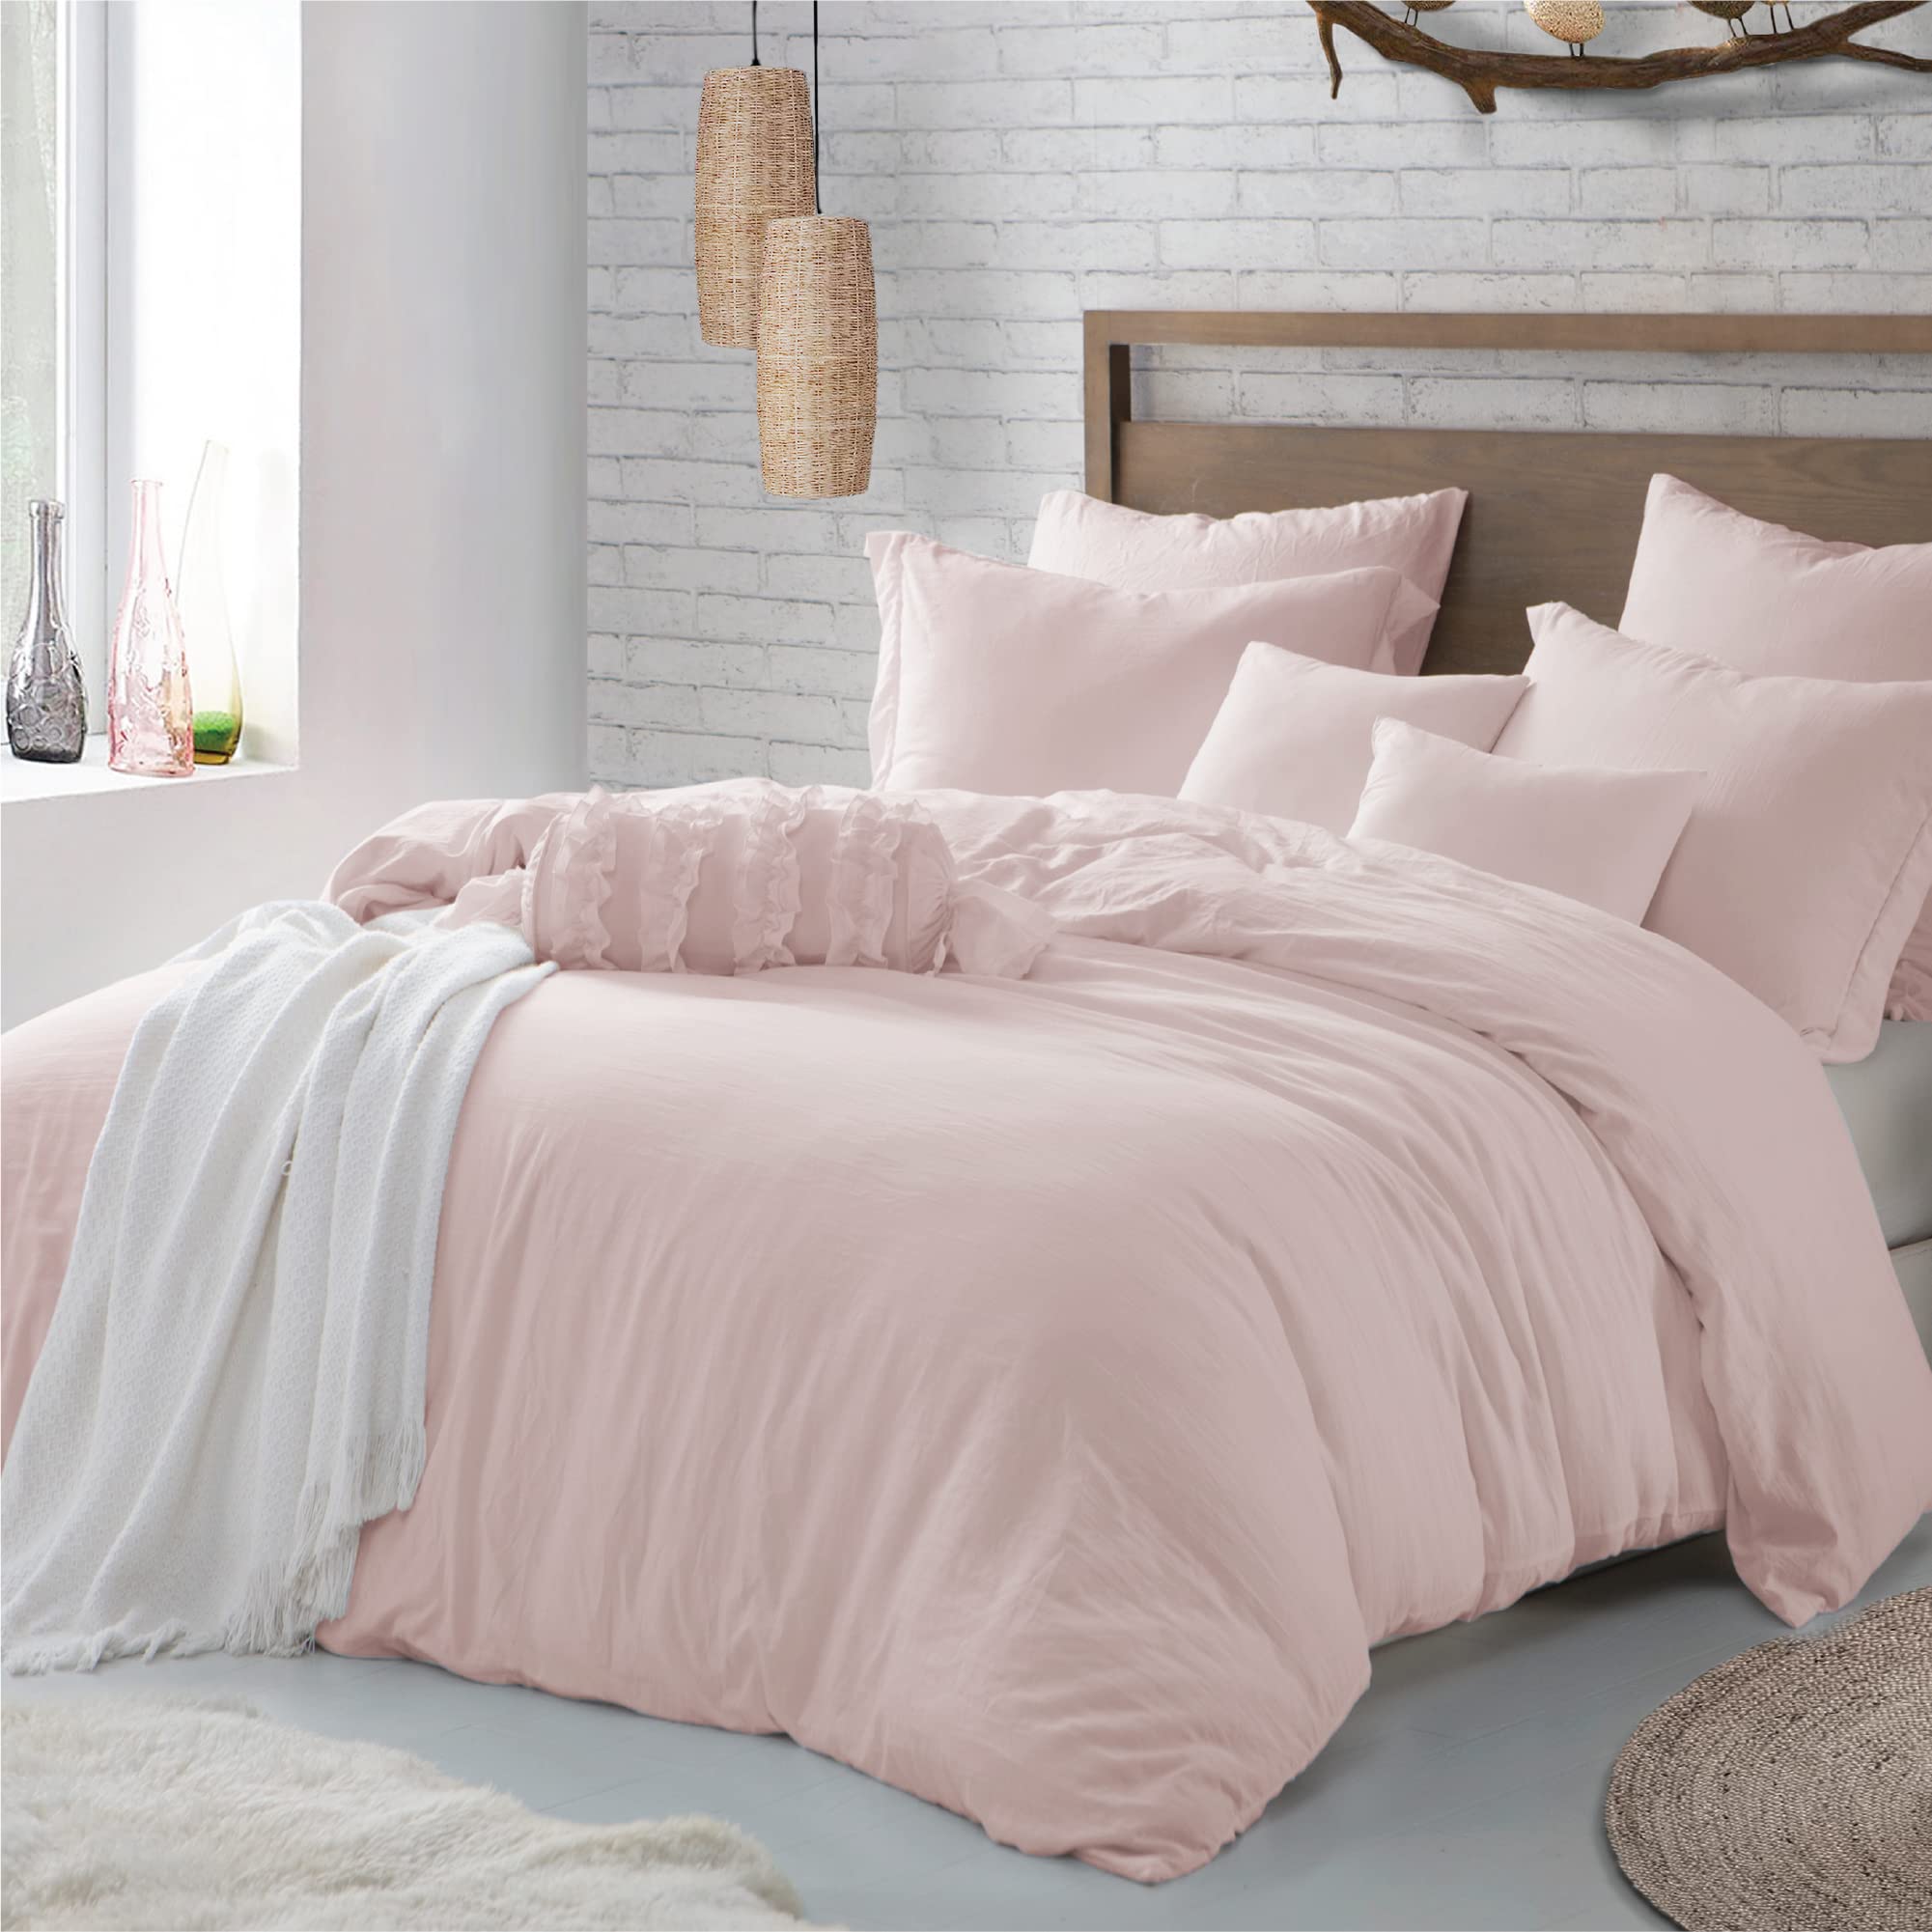 Book Cover Swift Home Microfiber Washed Crinkle Duvet Cover & Sham (1 Duvet Cover with Zipper Closure & 1 Pillow Sham), Ultra-Soft & Hypoallergenic – Twin/Twin XL, Rose Blush(Comforter NOT Included) Twin/Twin-XL (68